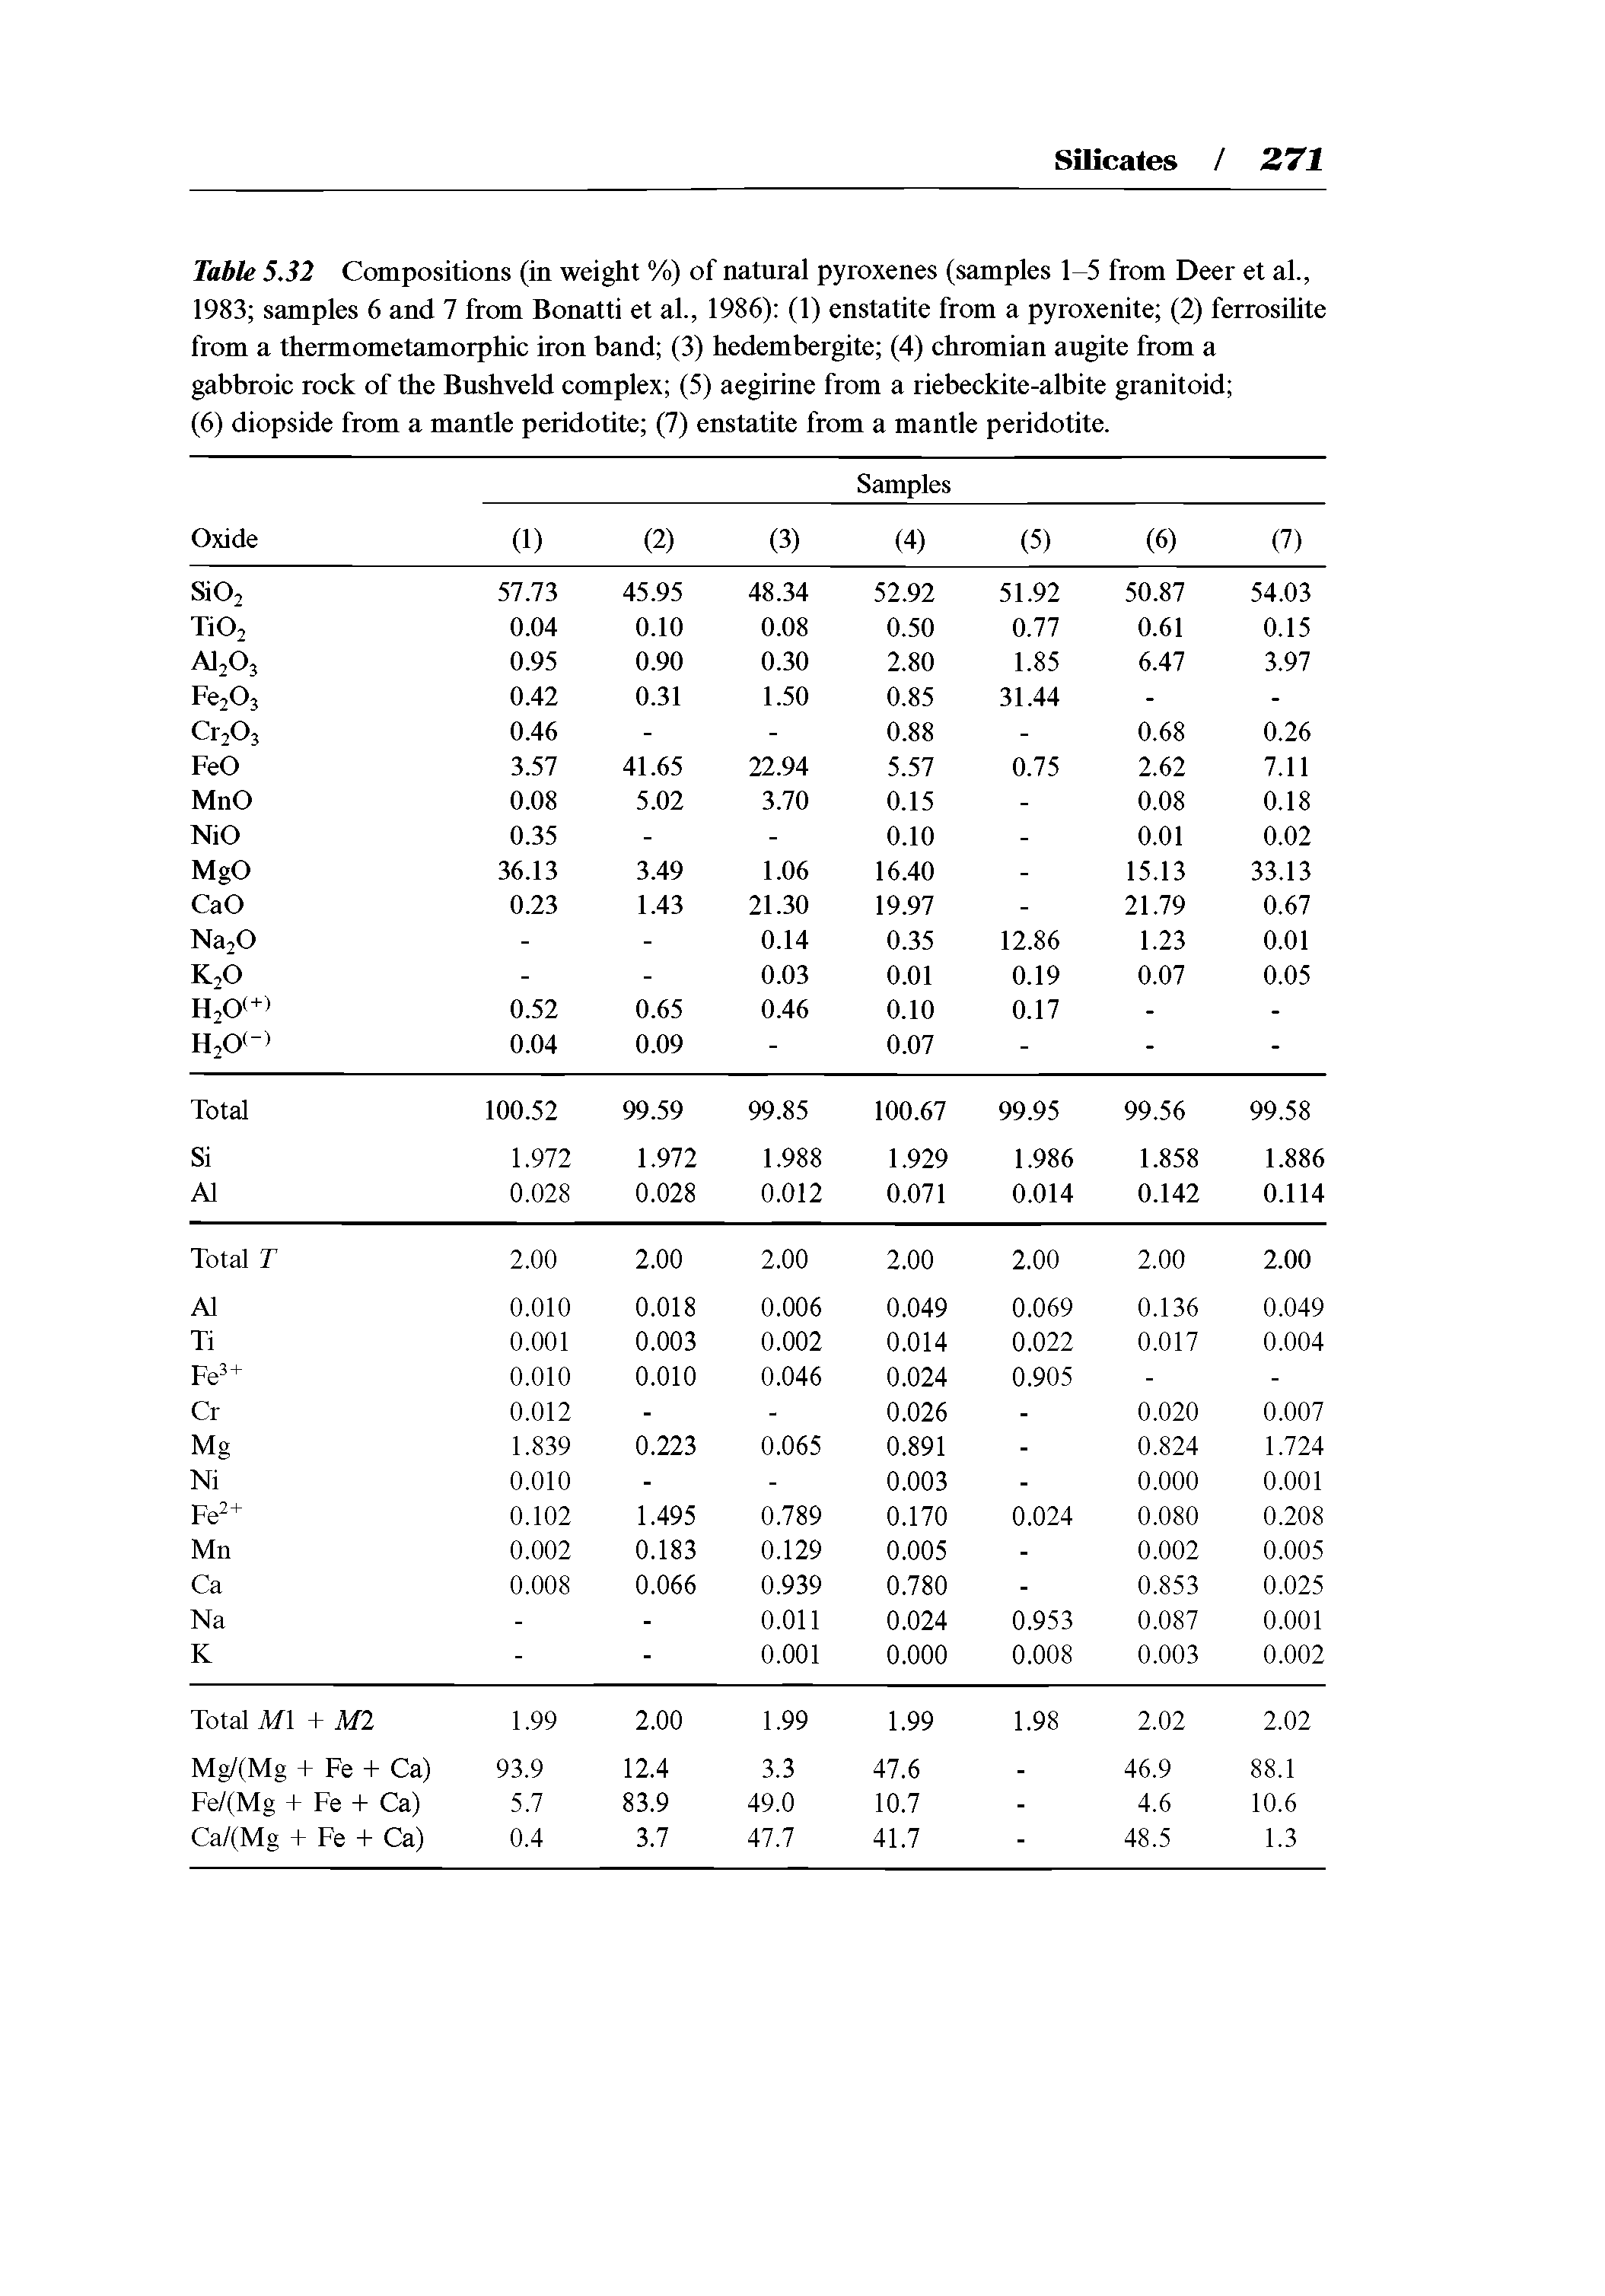 Table 5.32 Compositions (in weight %) of natural pyroxenes (samples 1-5 from Deer et al., 1983 samples 6 and 7 from Bonatti et al., 1986) (1) enstatite from a pyroxenite (2) ferrosilite from a thermometamorphic iron band (3) hedembergite (4) chromian augite from a gabbroic rock of the Bushveld complex (5) aegirine from a riebeckite-albite granitoid (6) diopside from a mantle peridotite (7) enstatite from a mantle peridotite. ...